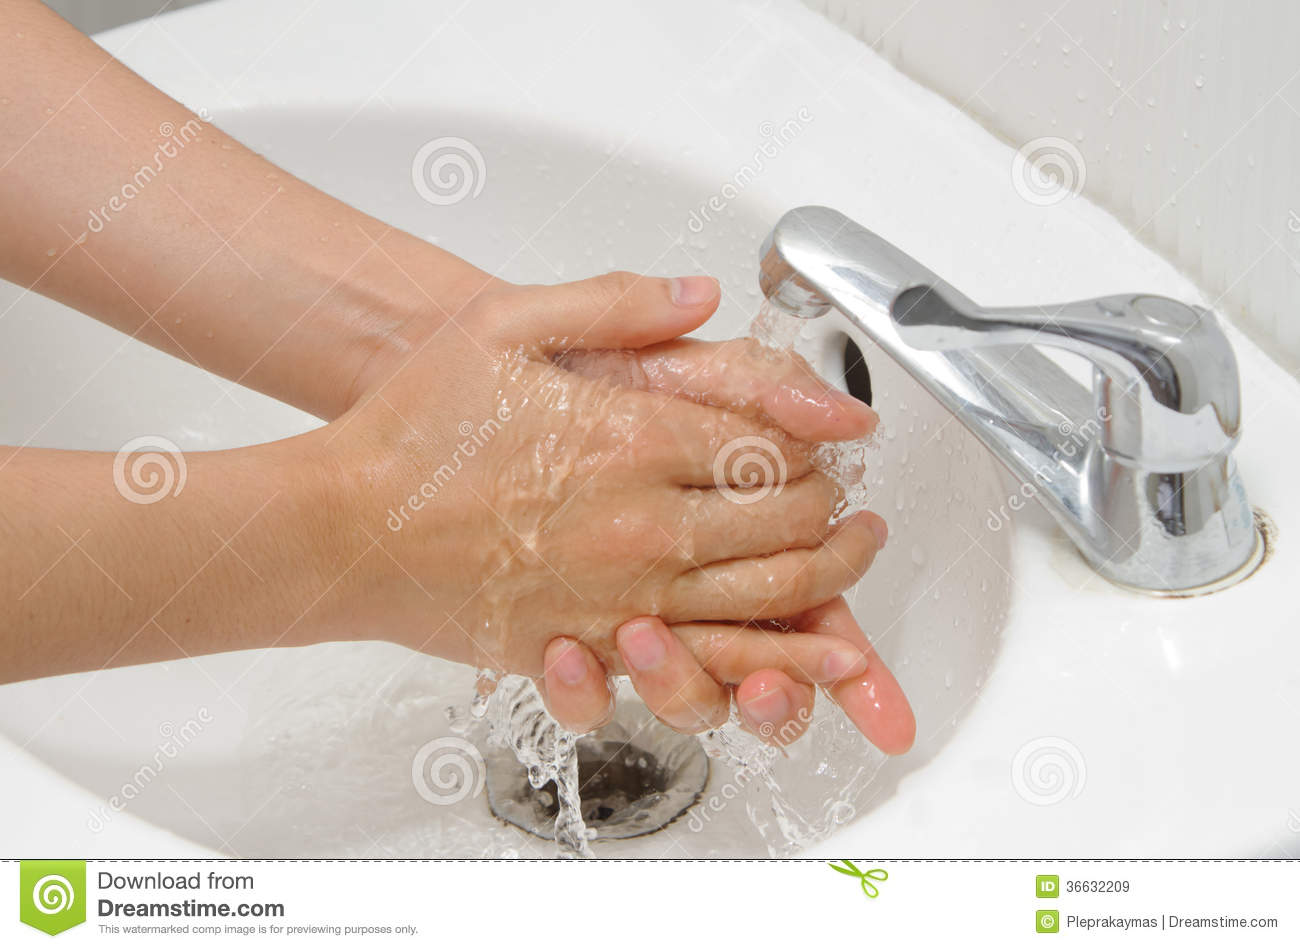 Washing Hands Under Flowing Tap Water Royalty Free Stock Images    